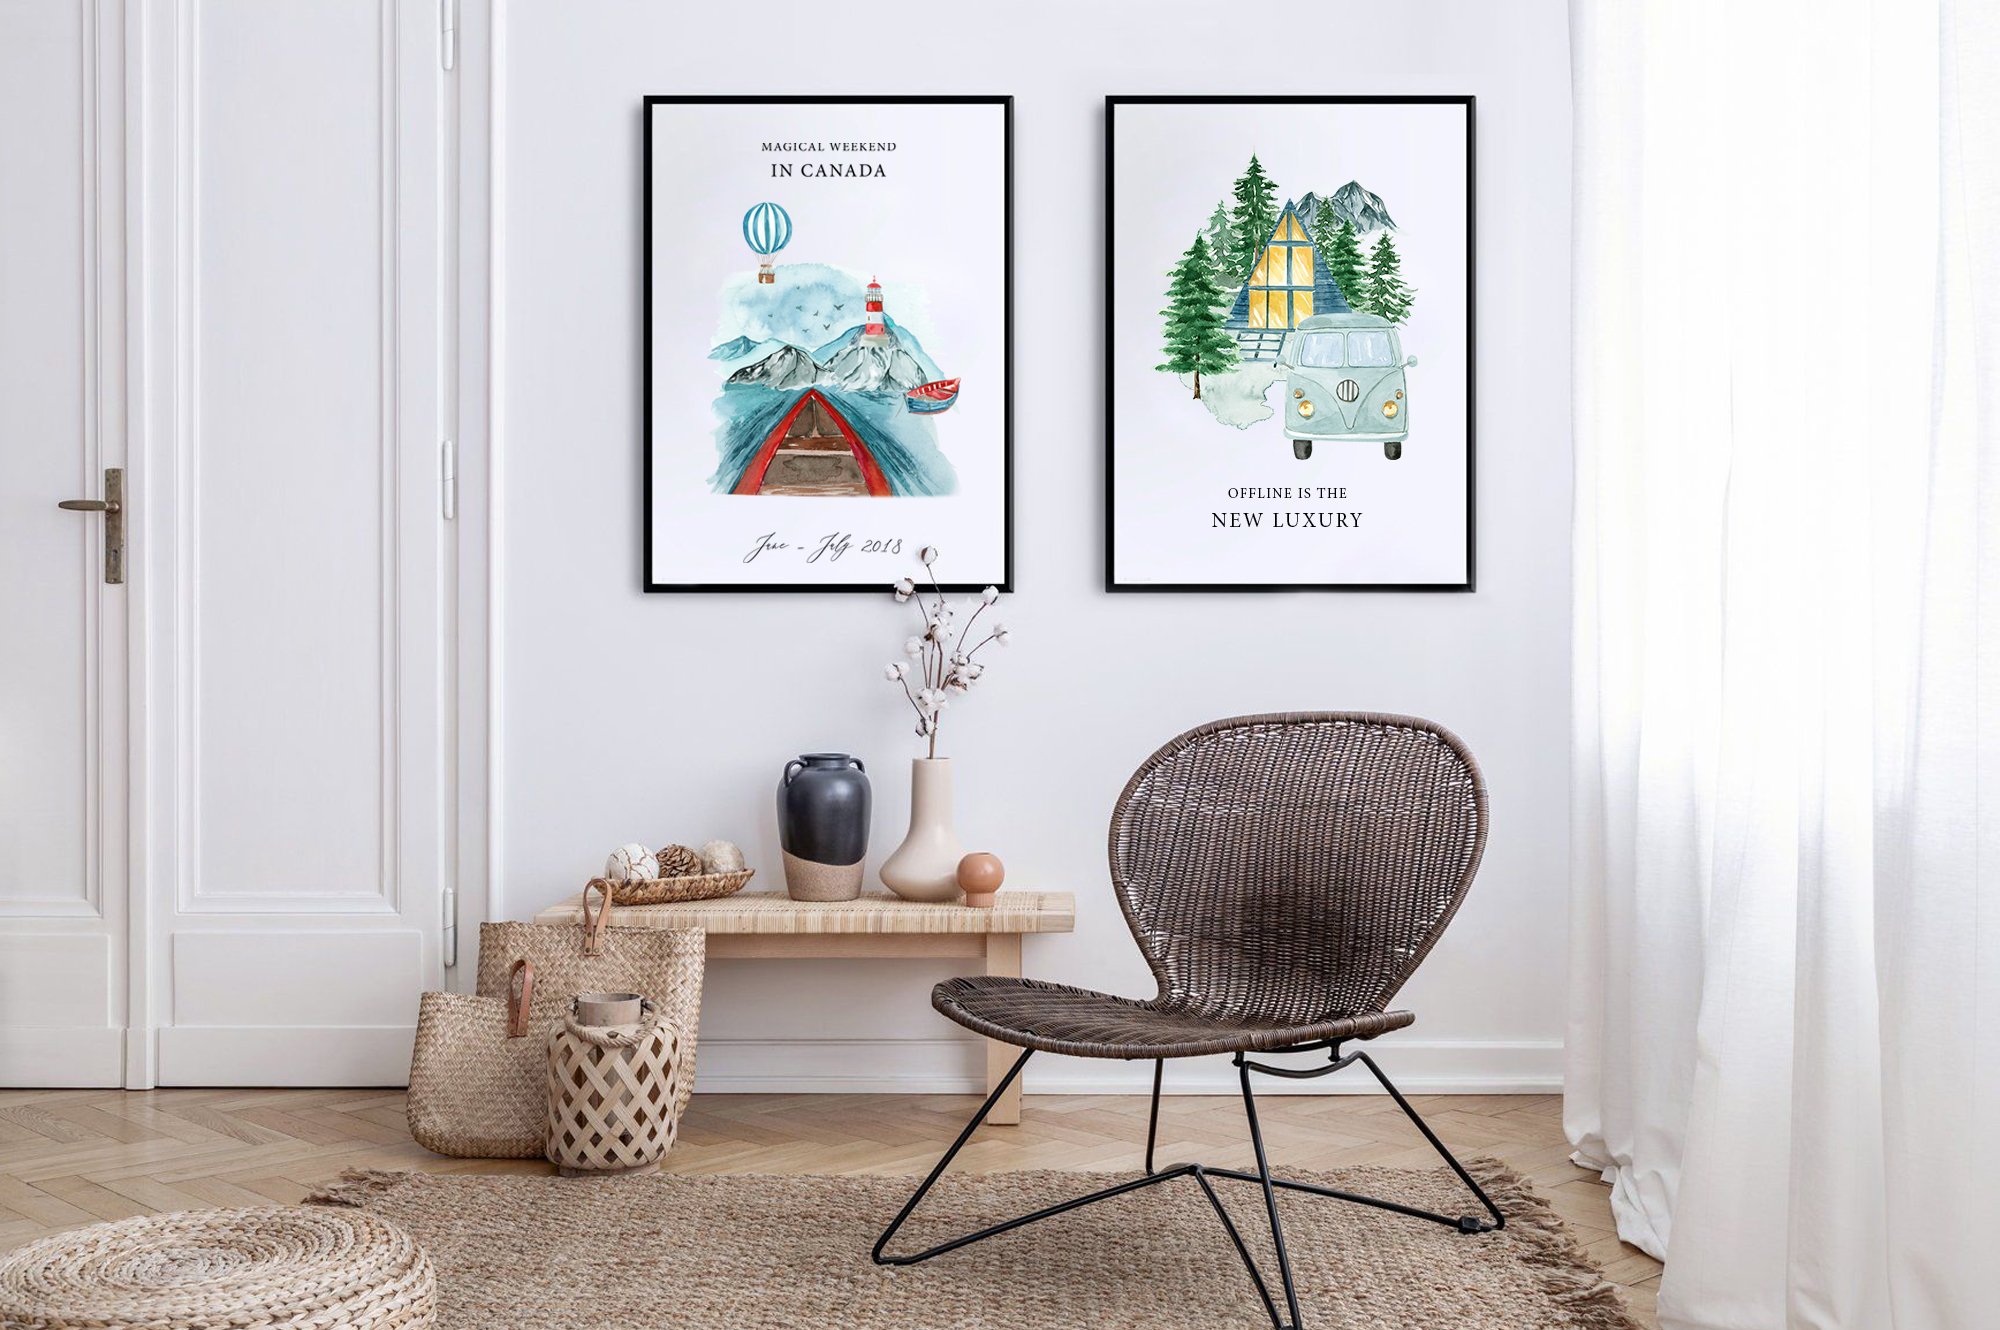 Cool posters with camping.